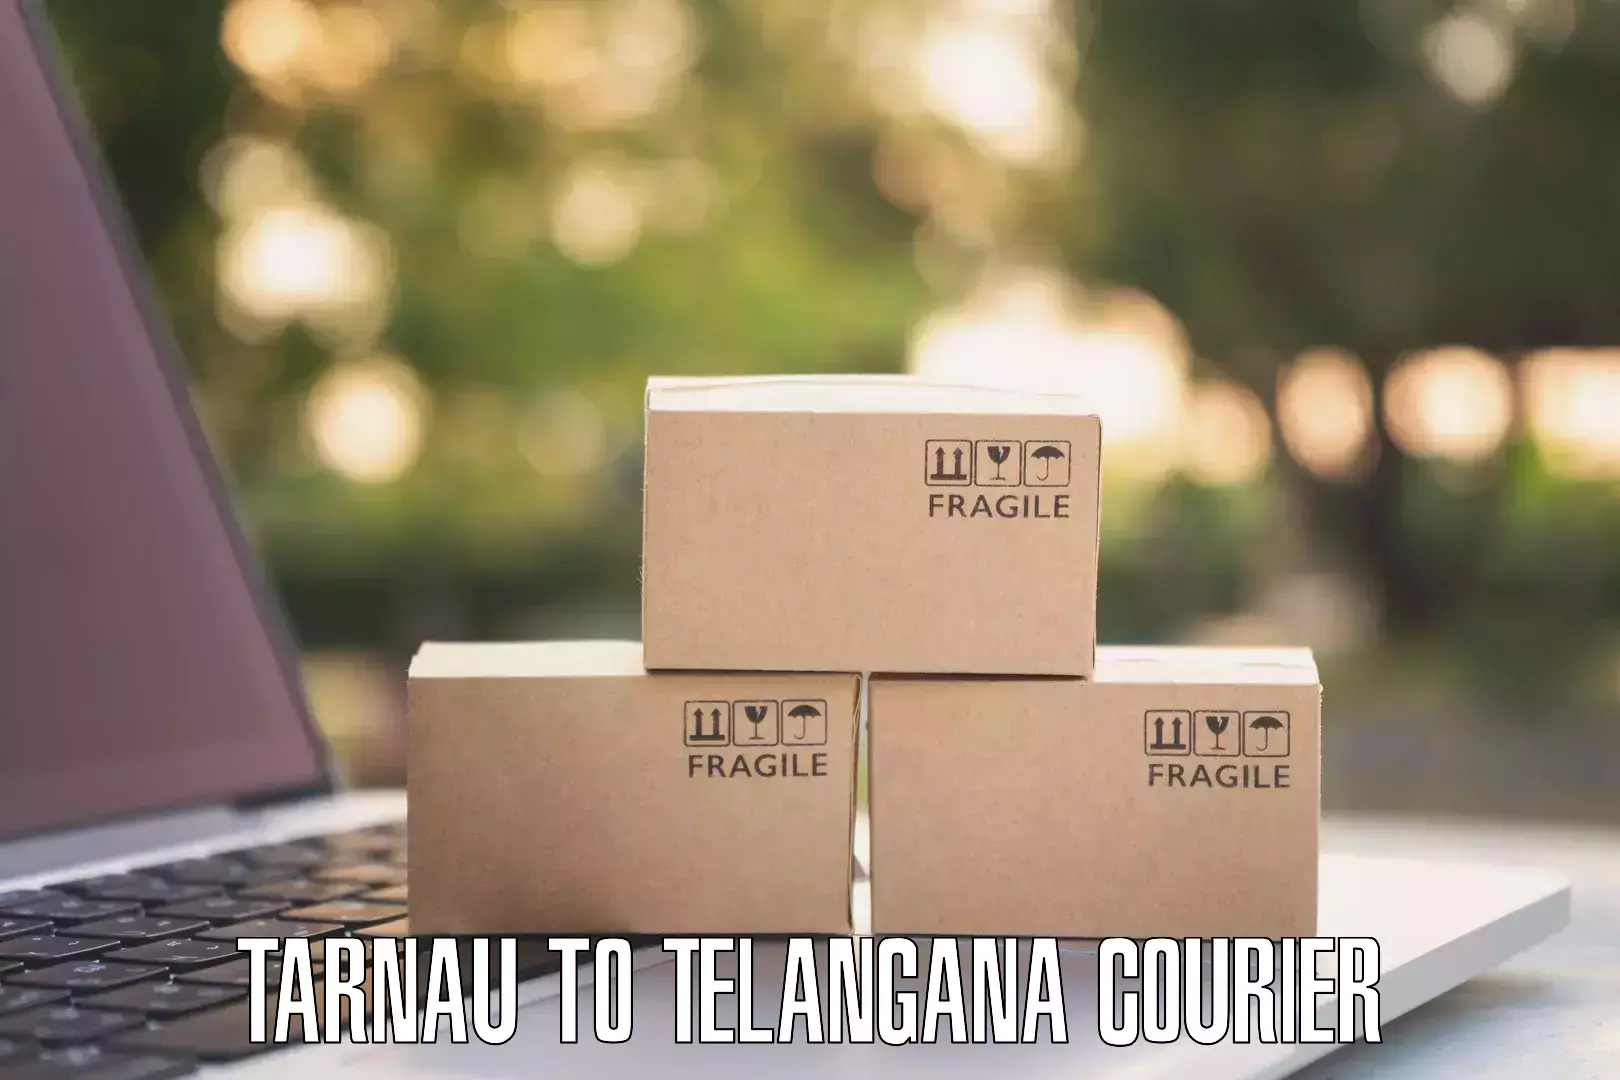 Reliable courier service in Tarnau to Suryapet